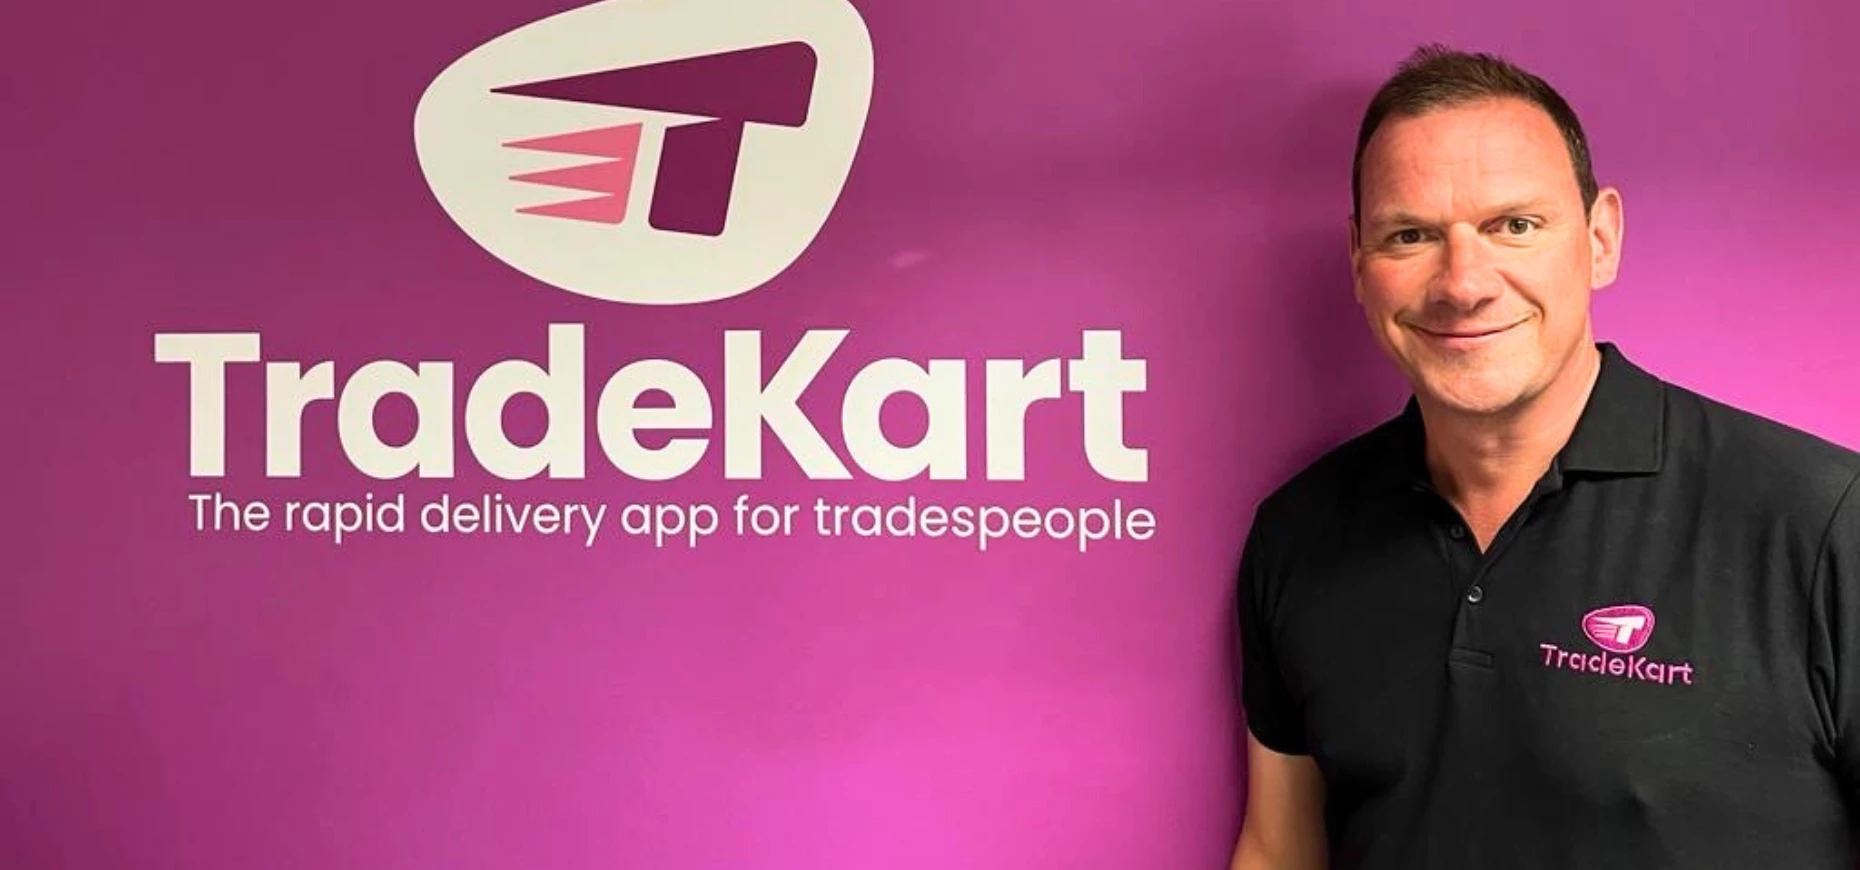 Alistair McAuley, founder and CEO at TradeKart.